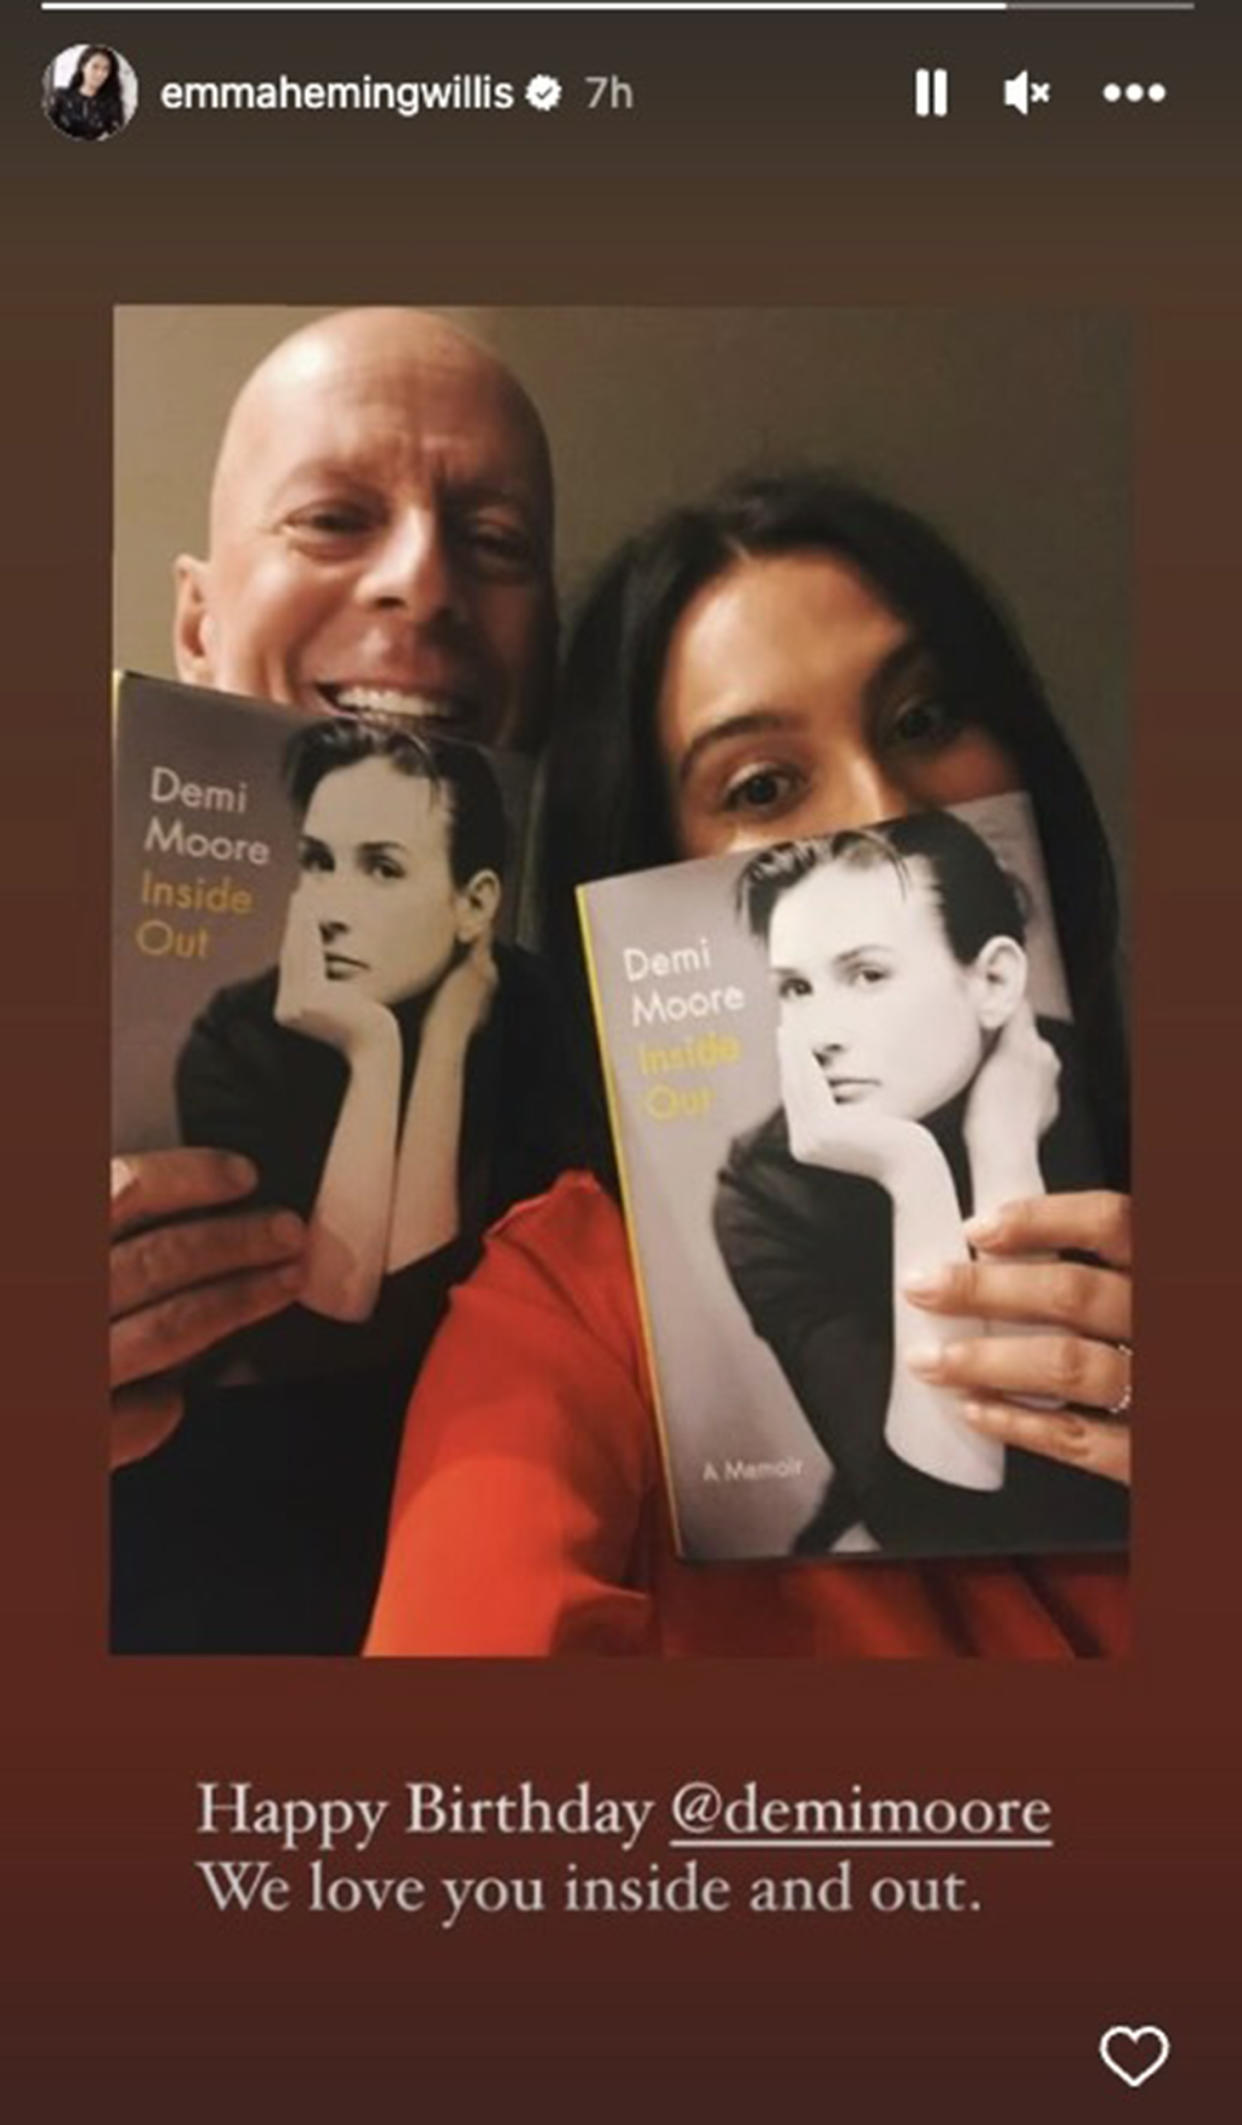 Bruce Willis and wife Emma Heming Willis sent a loving message to Demi Moore in honor of her 60th birthday. (@emmahemingwilli via Instagram )